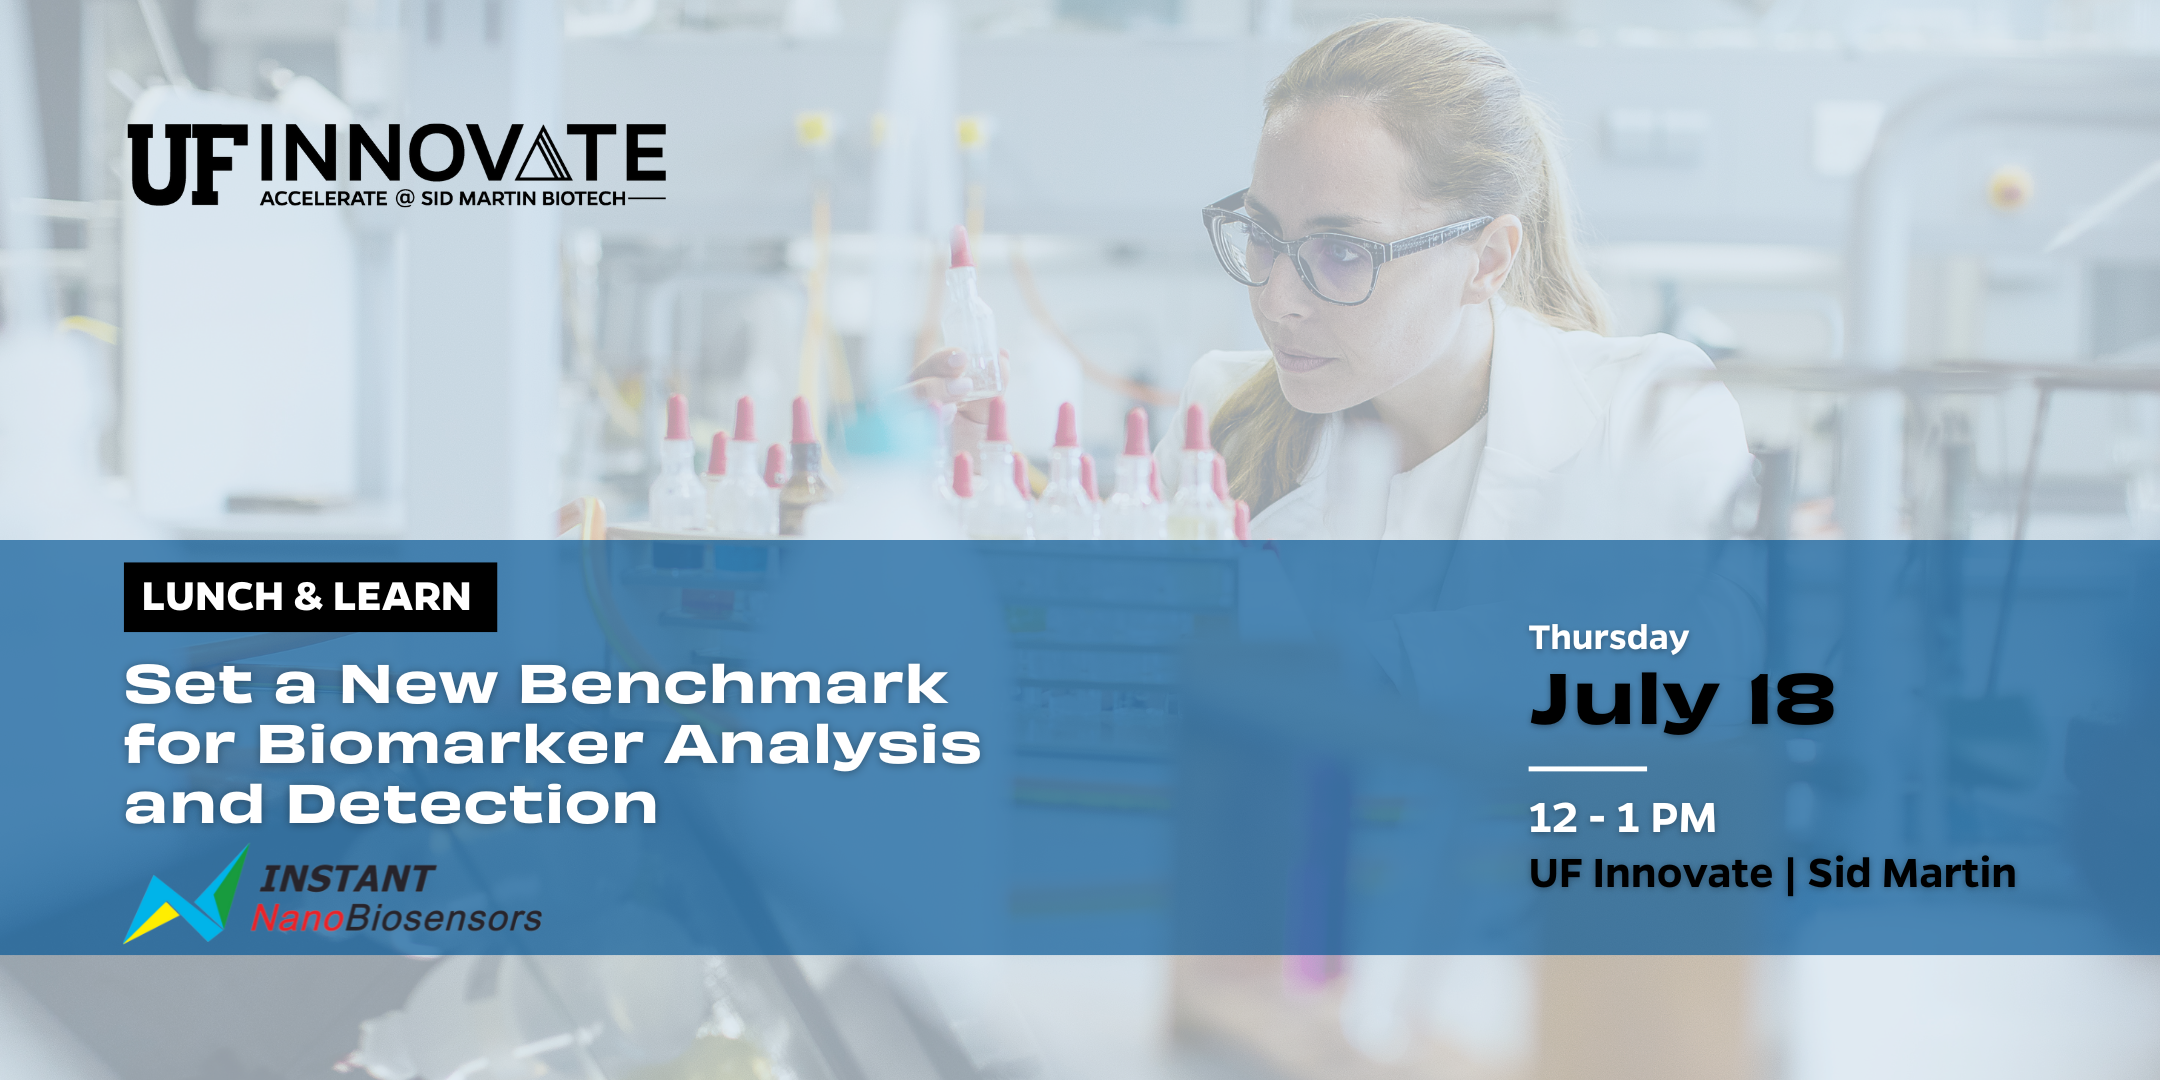 graphic for lunch and learn with Instant NanoBiosensors at UF Innovate | Sid Martin on July 18. Includes a QR code for this URL: https://calendar.ufl.edu/innovate/event/39303-set-a-new-benchmark-for-biomarker-analysis-and-detecti.